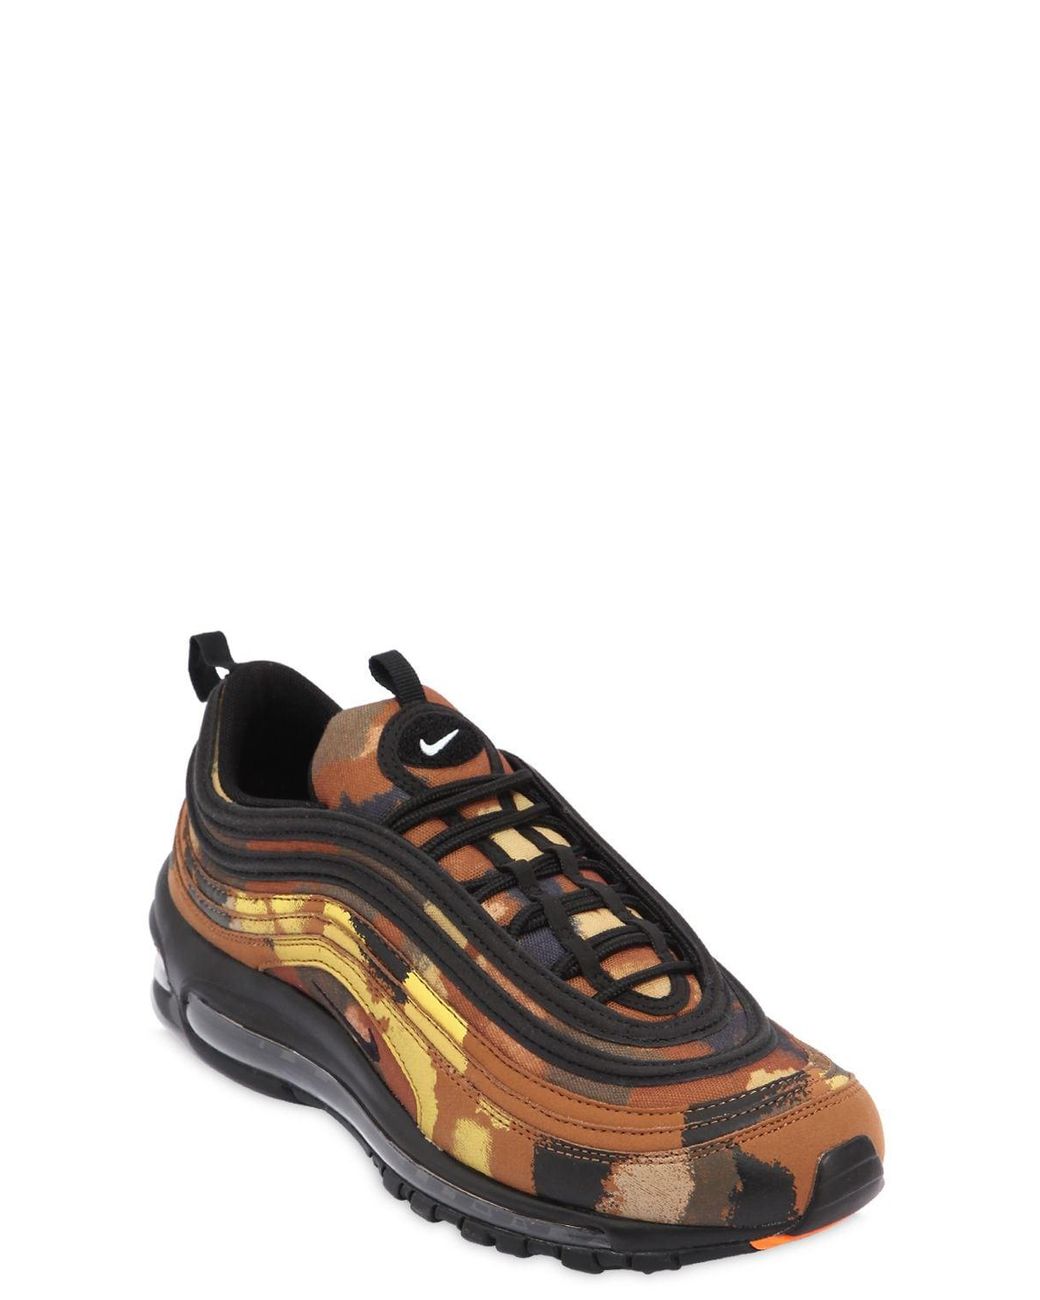 Nike Air Max 97 Camo Pack Italy Sneakers - Save 57% | Lyst UK